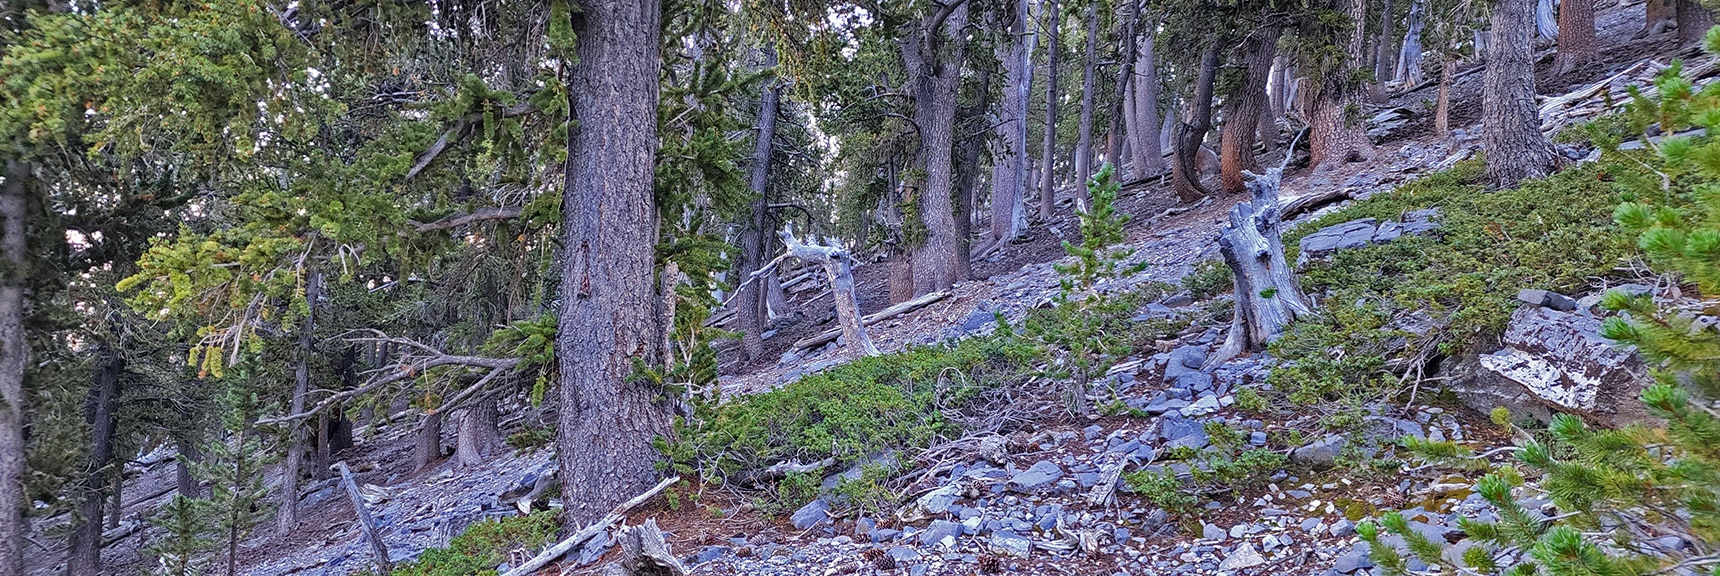 Slopes Below the Cliffs Remain Steep, Loose Rock, Forested | Mummy Mountain Grand Crossing | Lee Canyon to Deer Creek Road | Mt Charleston Wilderness | Spring Mountains, Nevada |